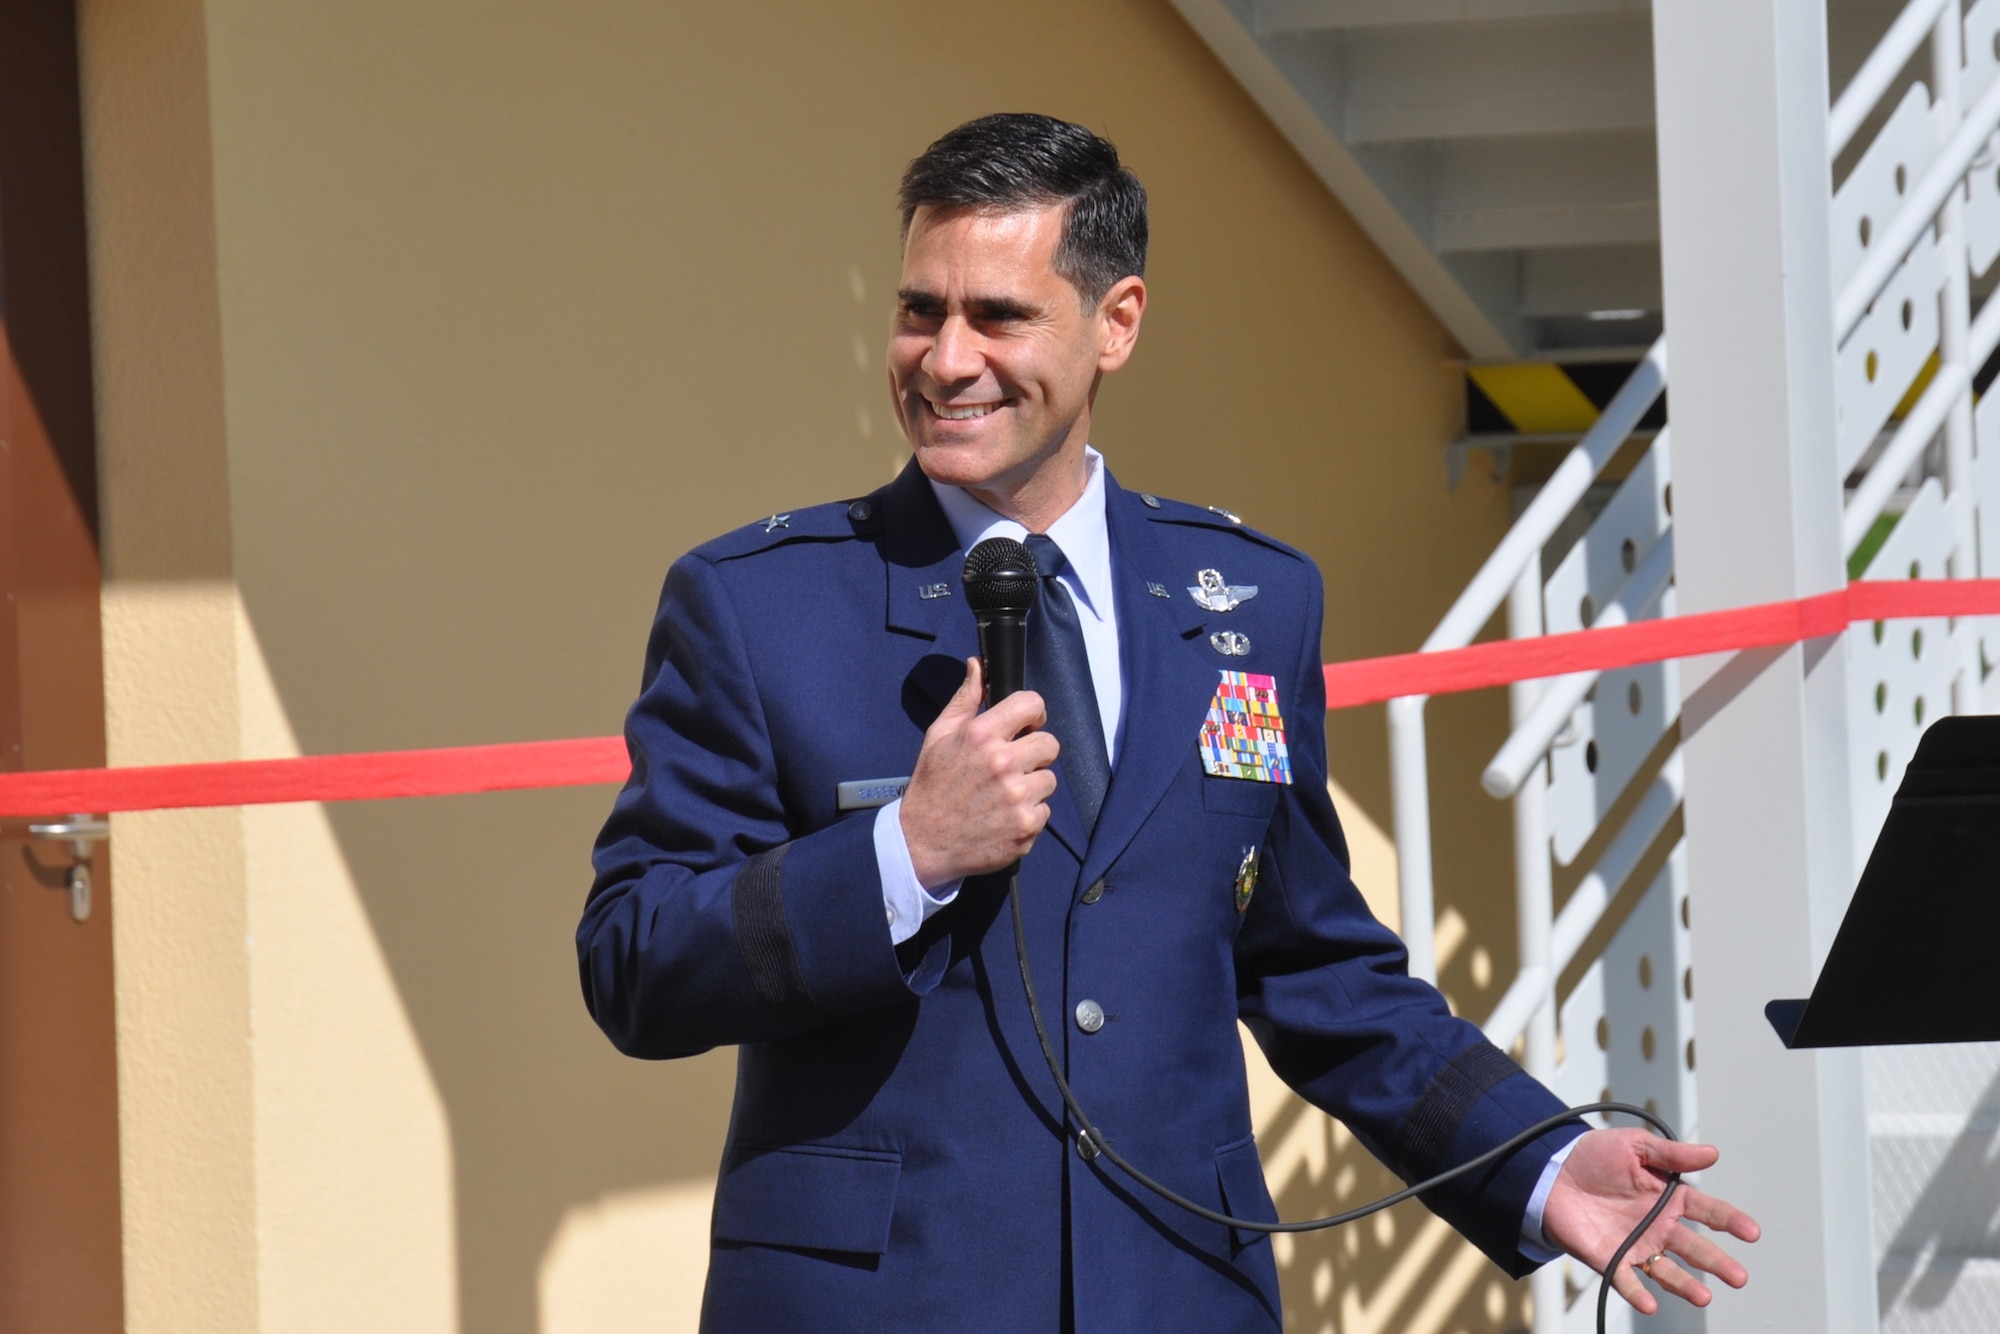 U.S. Air Force Brig. Gen. Marc Sasseville, Office of Defense Cooperation-Turkey Senior Defense Official/Defense Attaché, addresses the crowd during the grand opening of the new base administrative building March 26, 2015, at the Ankara Support Facility in Turkey. During his speech Sasseville explained how the building is certified Leadership in Energy & Environmental Design Silver. (U.S. Air Force photo by Capt. Laura Balch/Released)